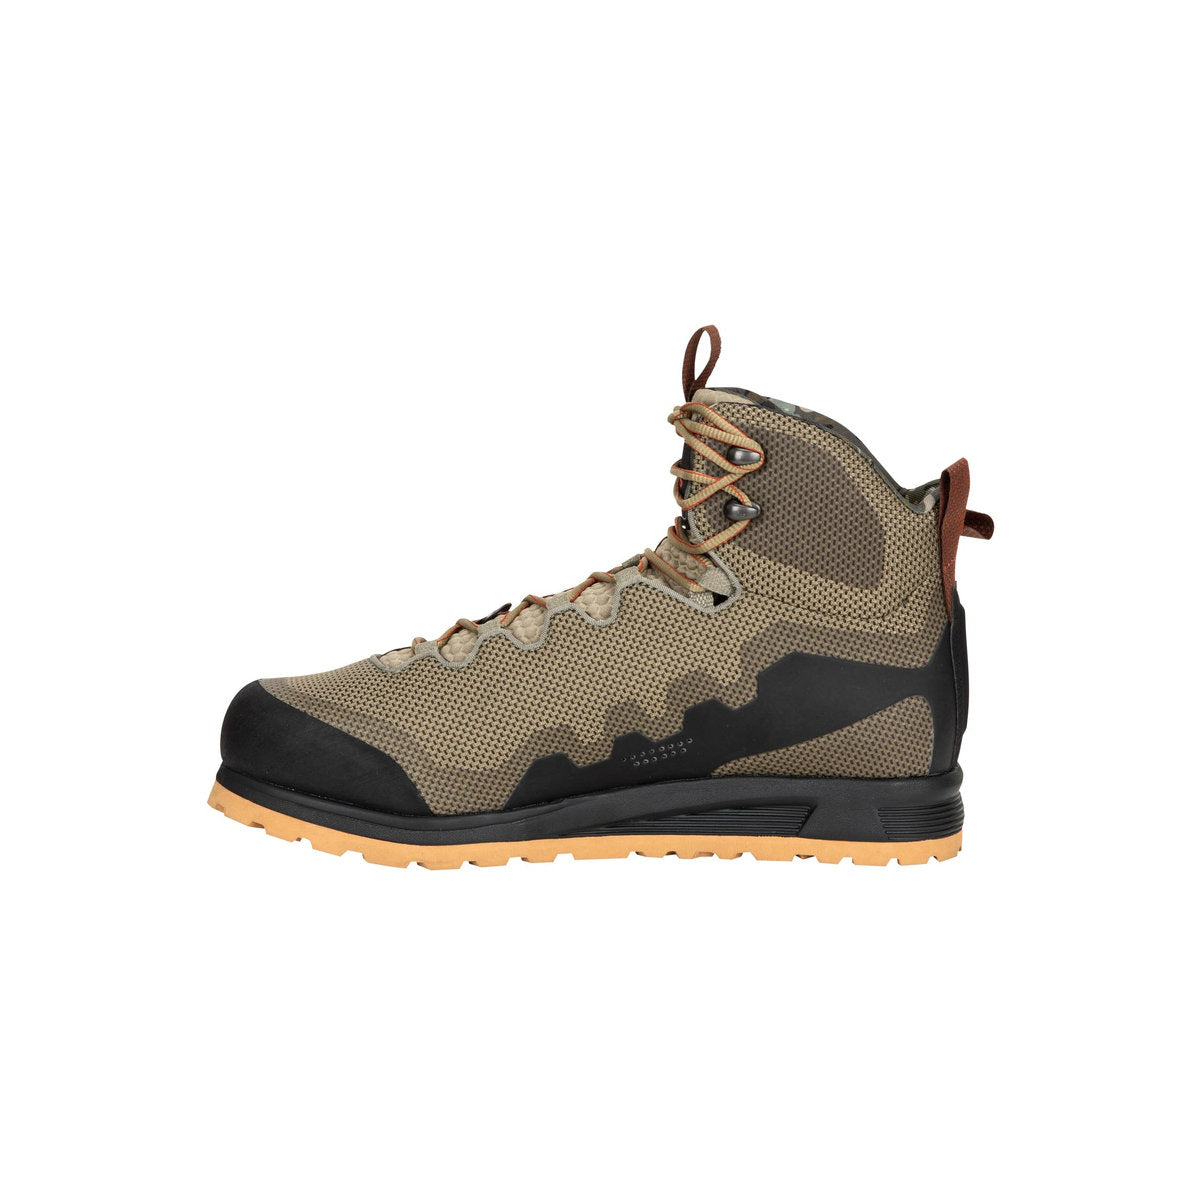 Simms Wading Boots Rubber Sole